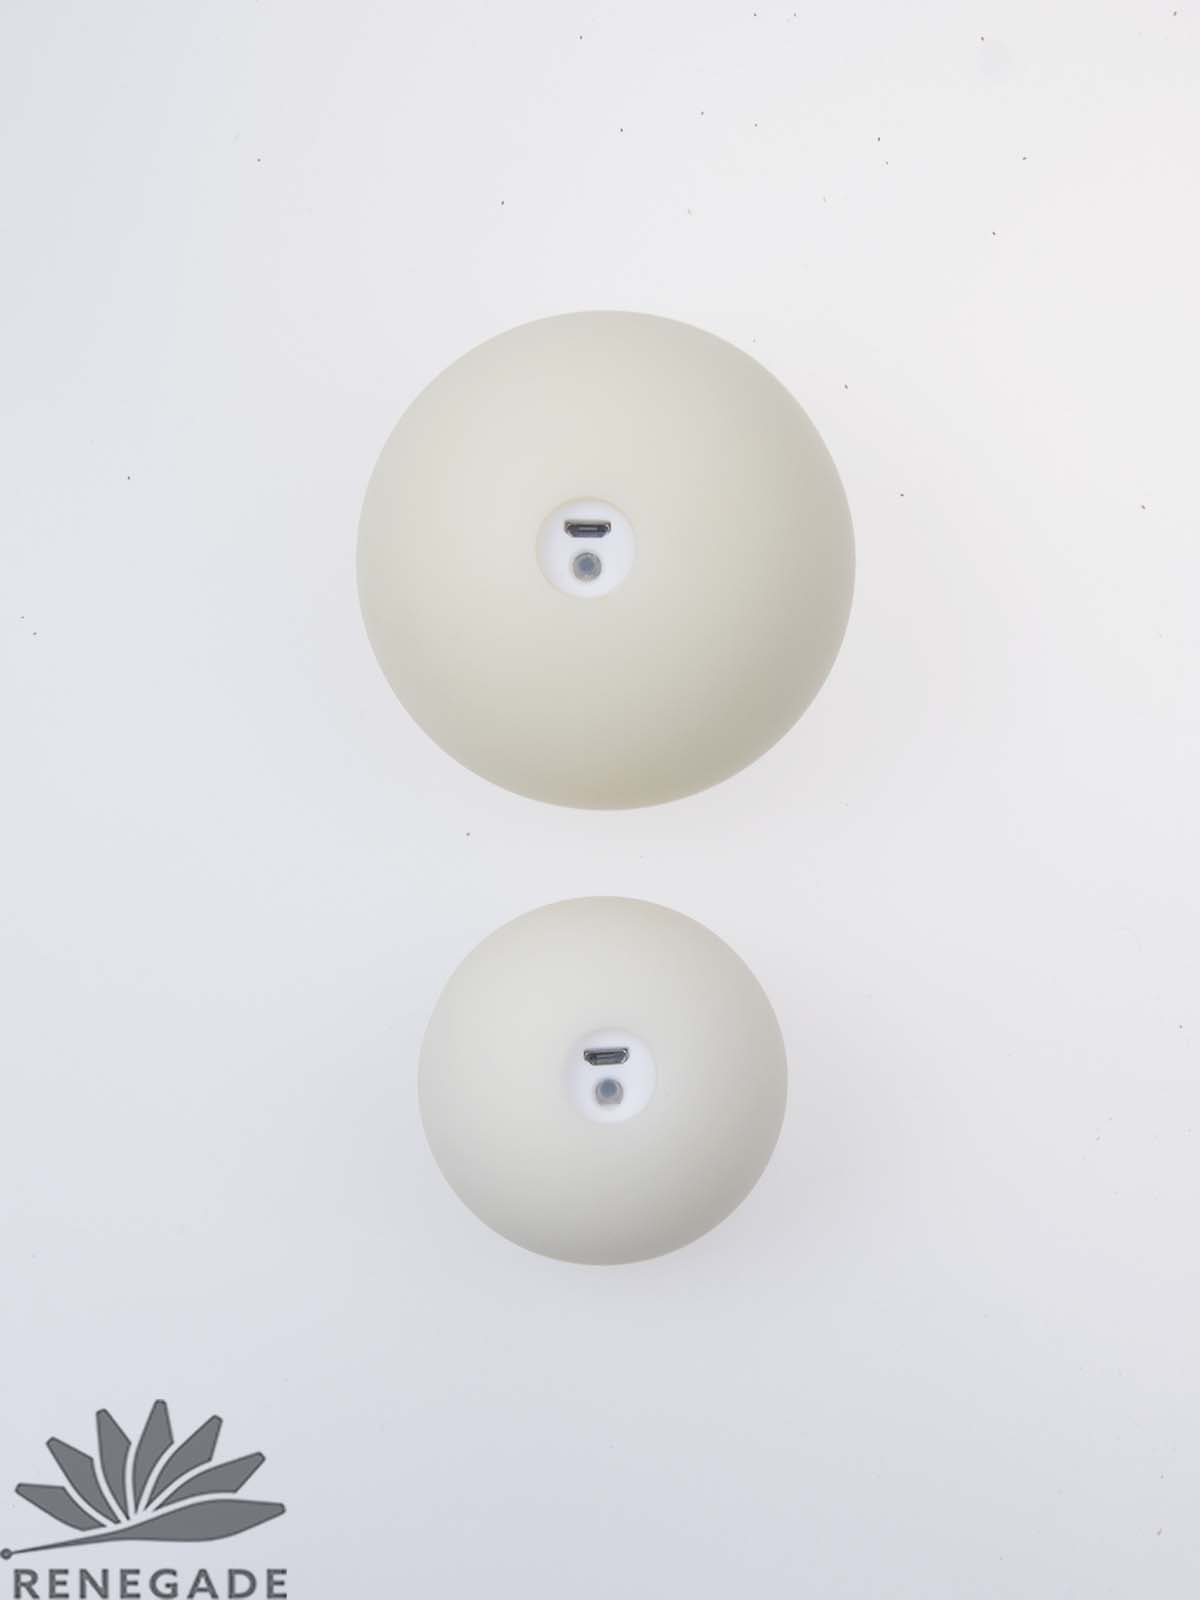 70mm Details about   3x LED Rechargeable Juggling Balls 